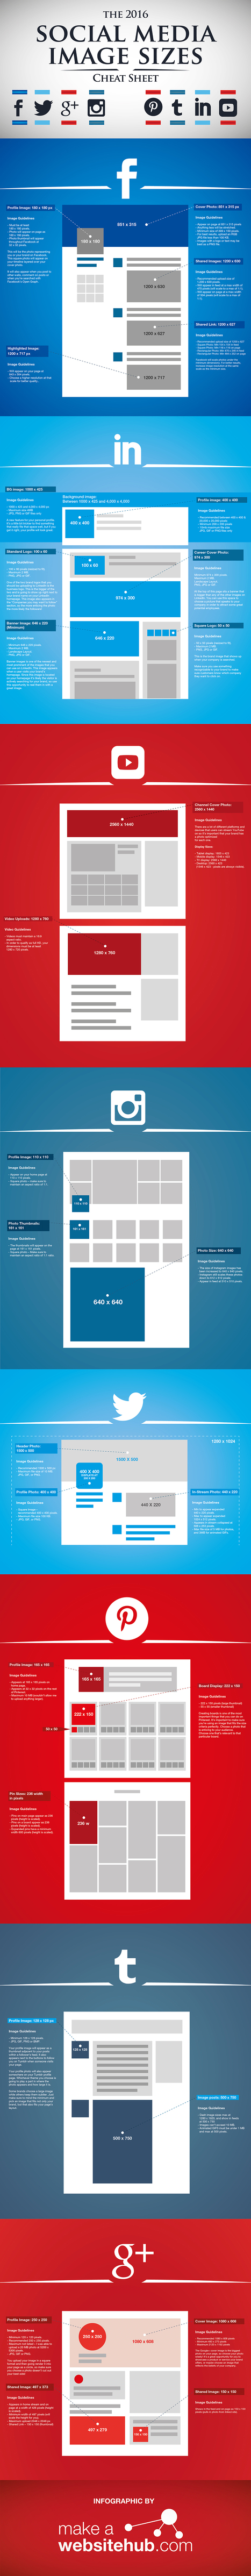 2016 Social Media Image Sizes Cheat Sheet | Infographic | Distance Learning, mLearning, Digital Education, Technology | Scoop.it